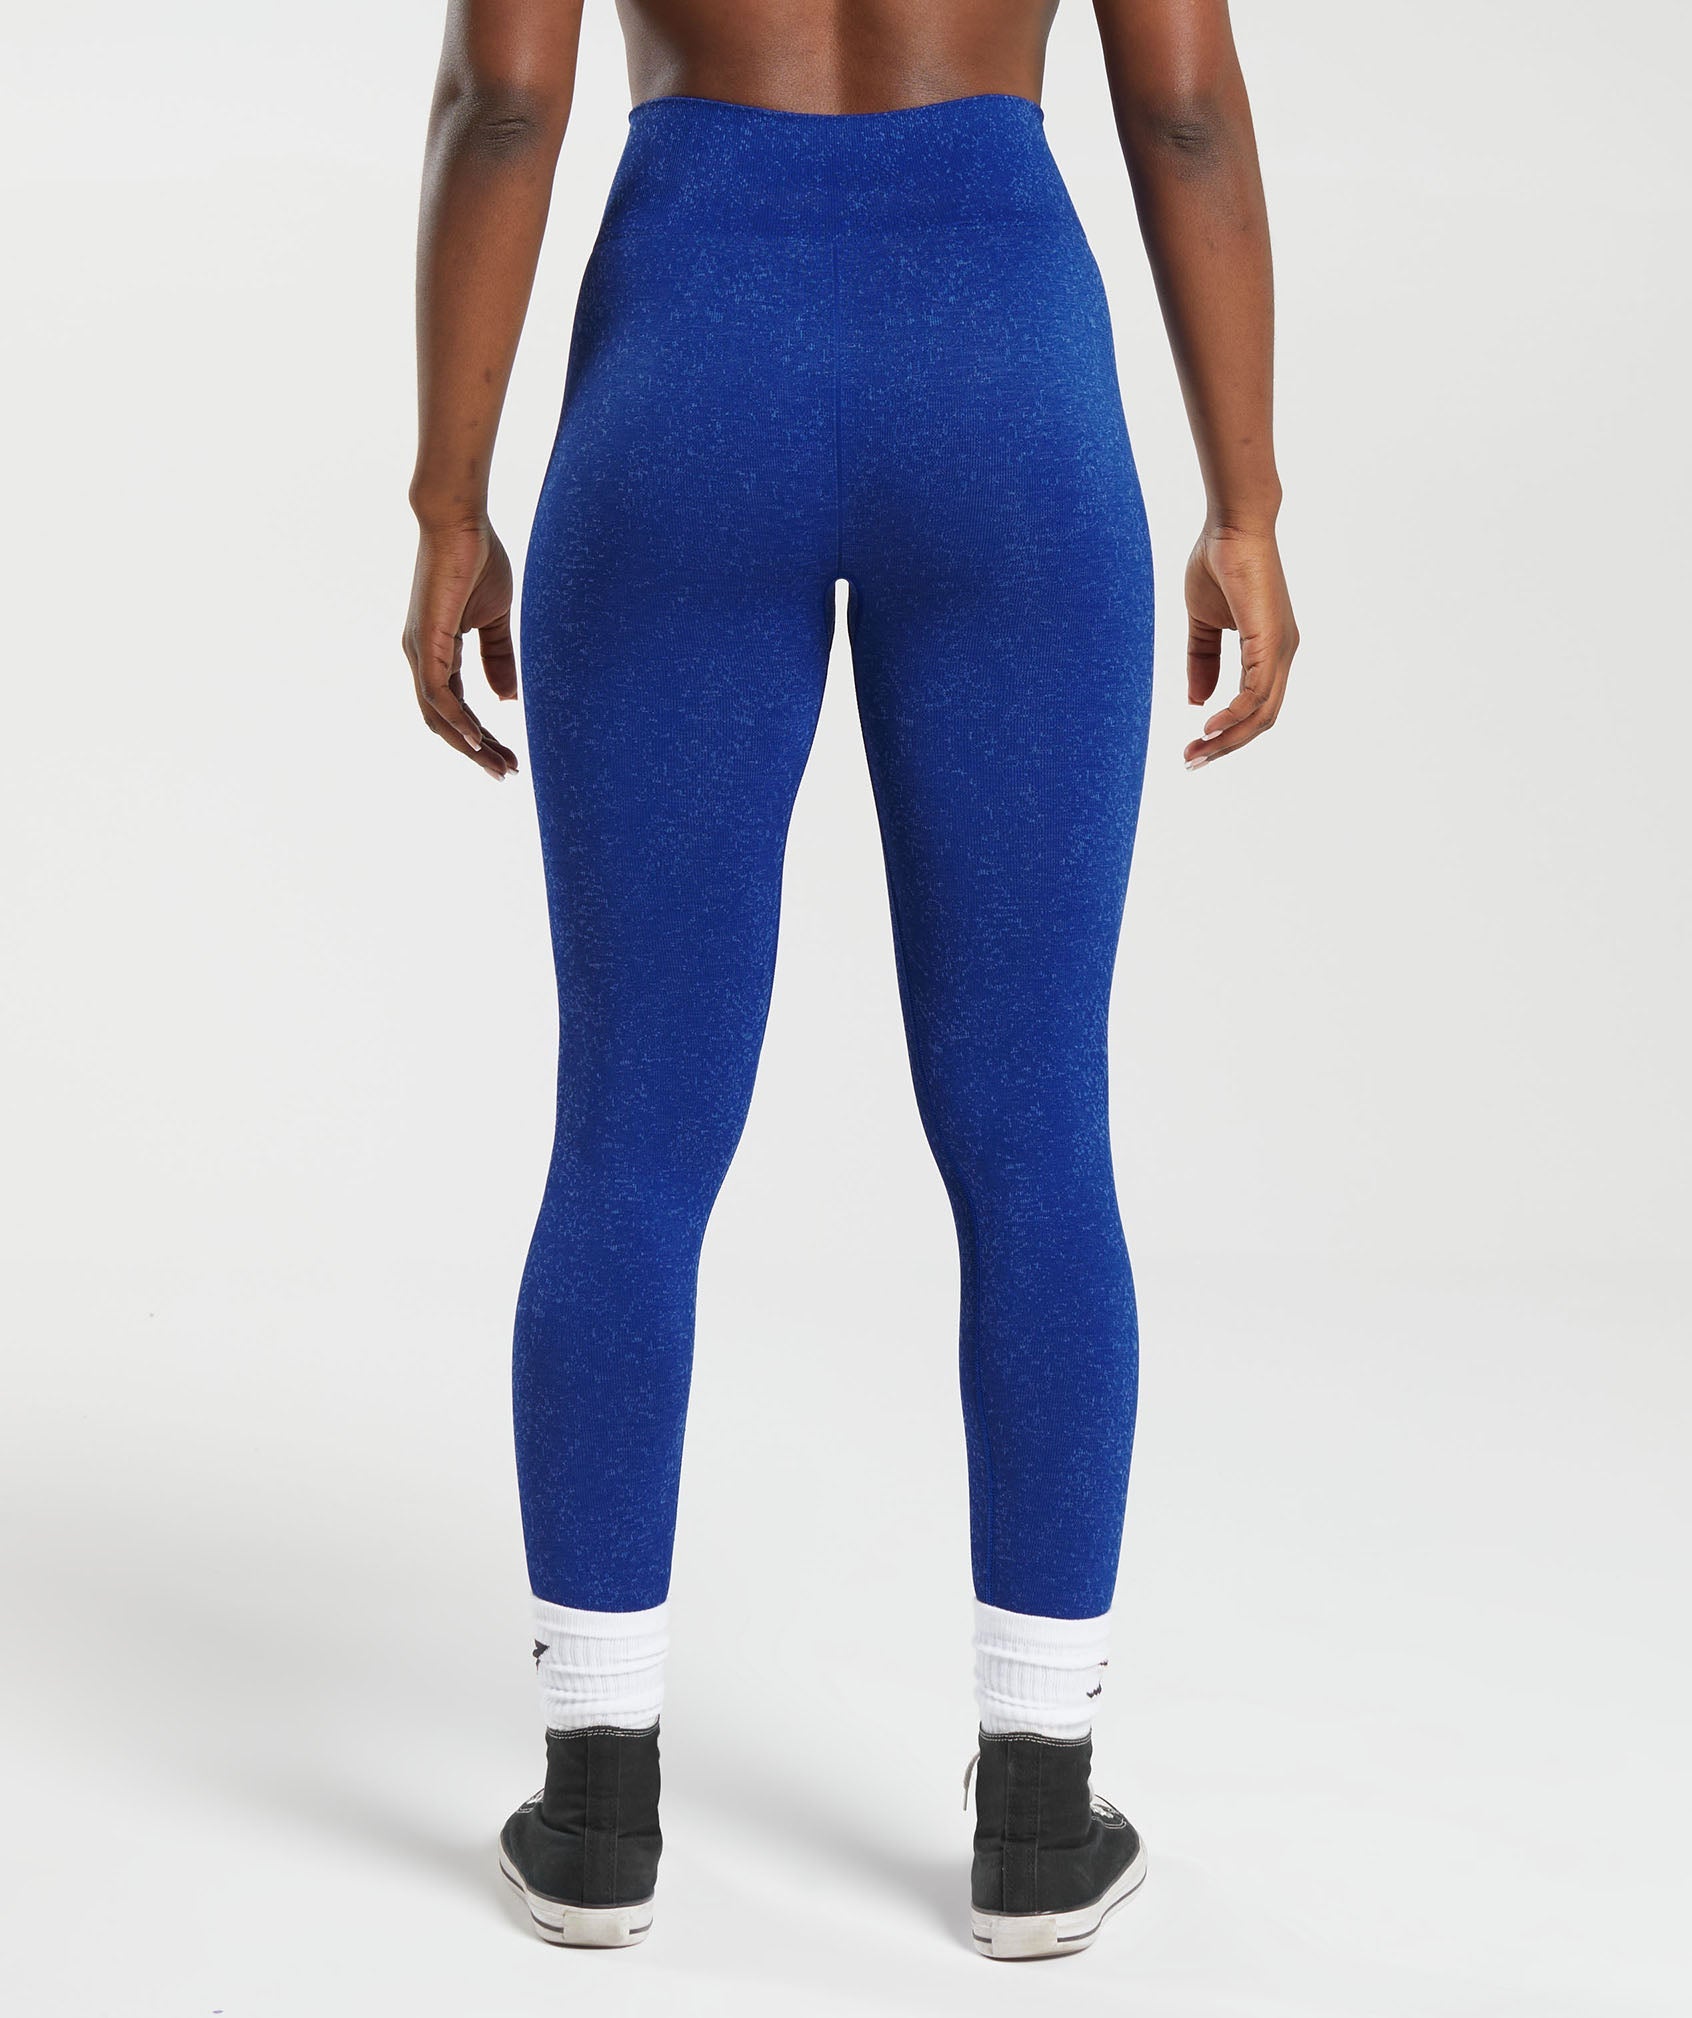 Lapis Lazuli Shapes - Cobalt Blue Abstract Leggings by TIMELESS